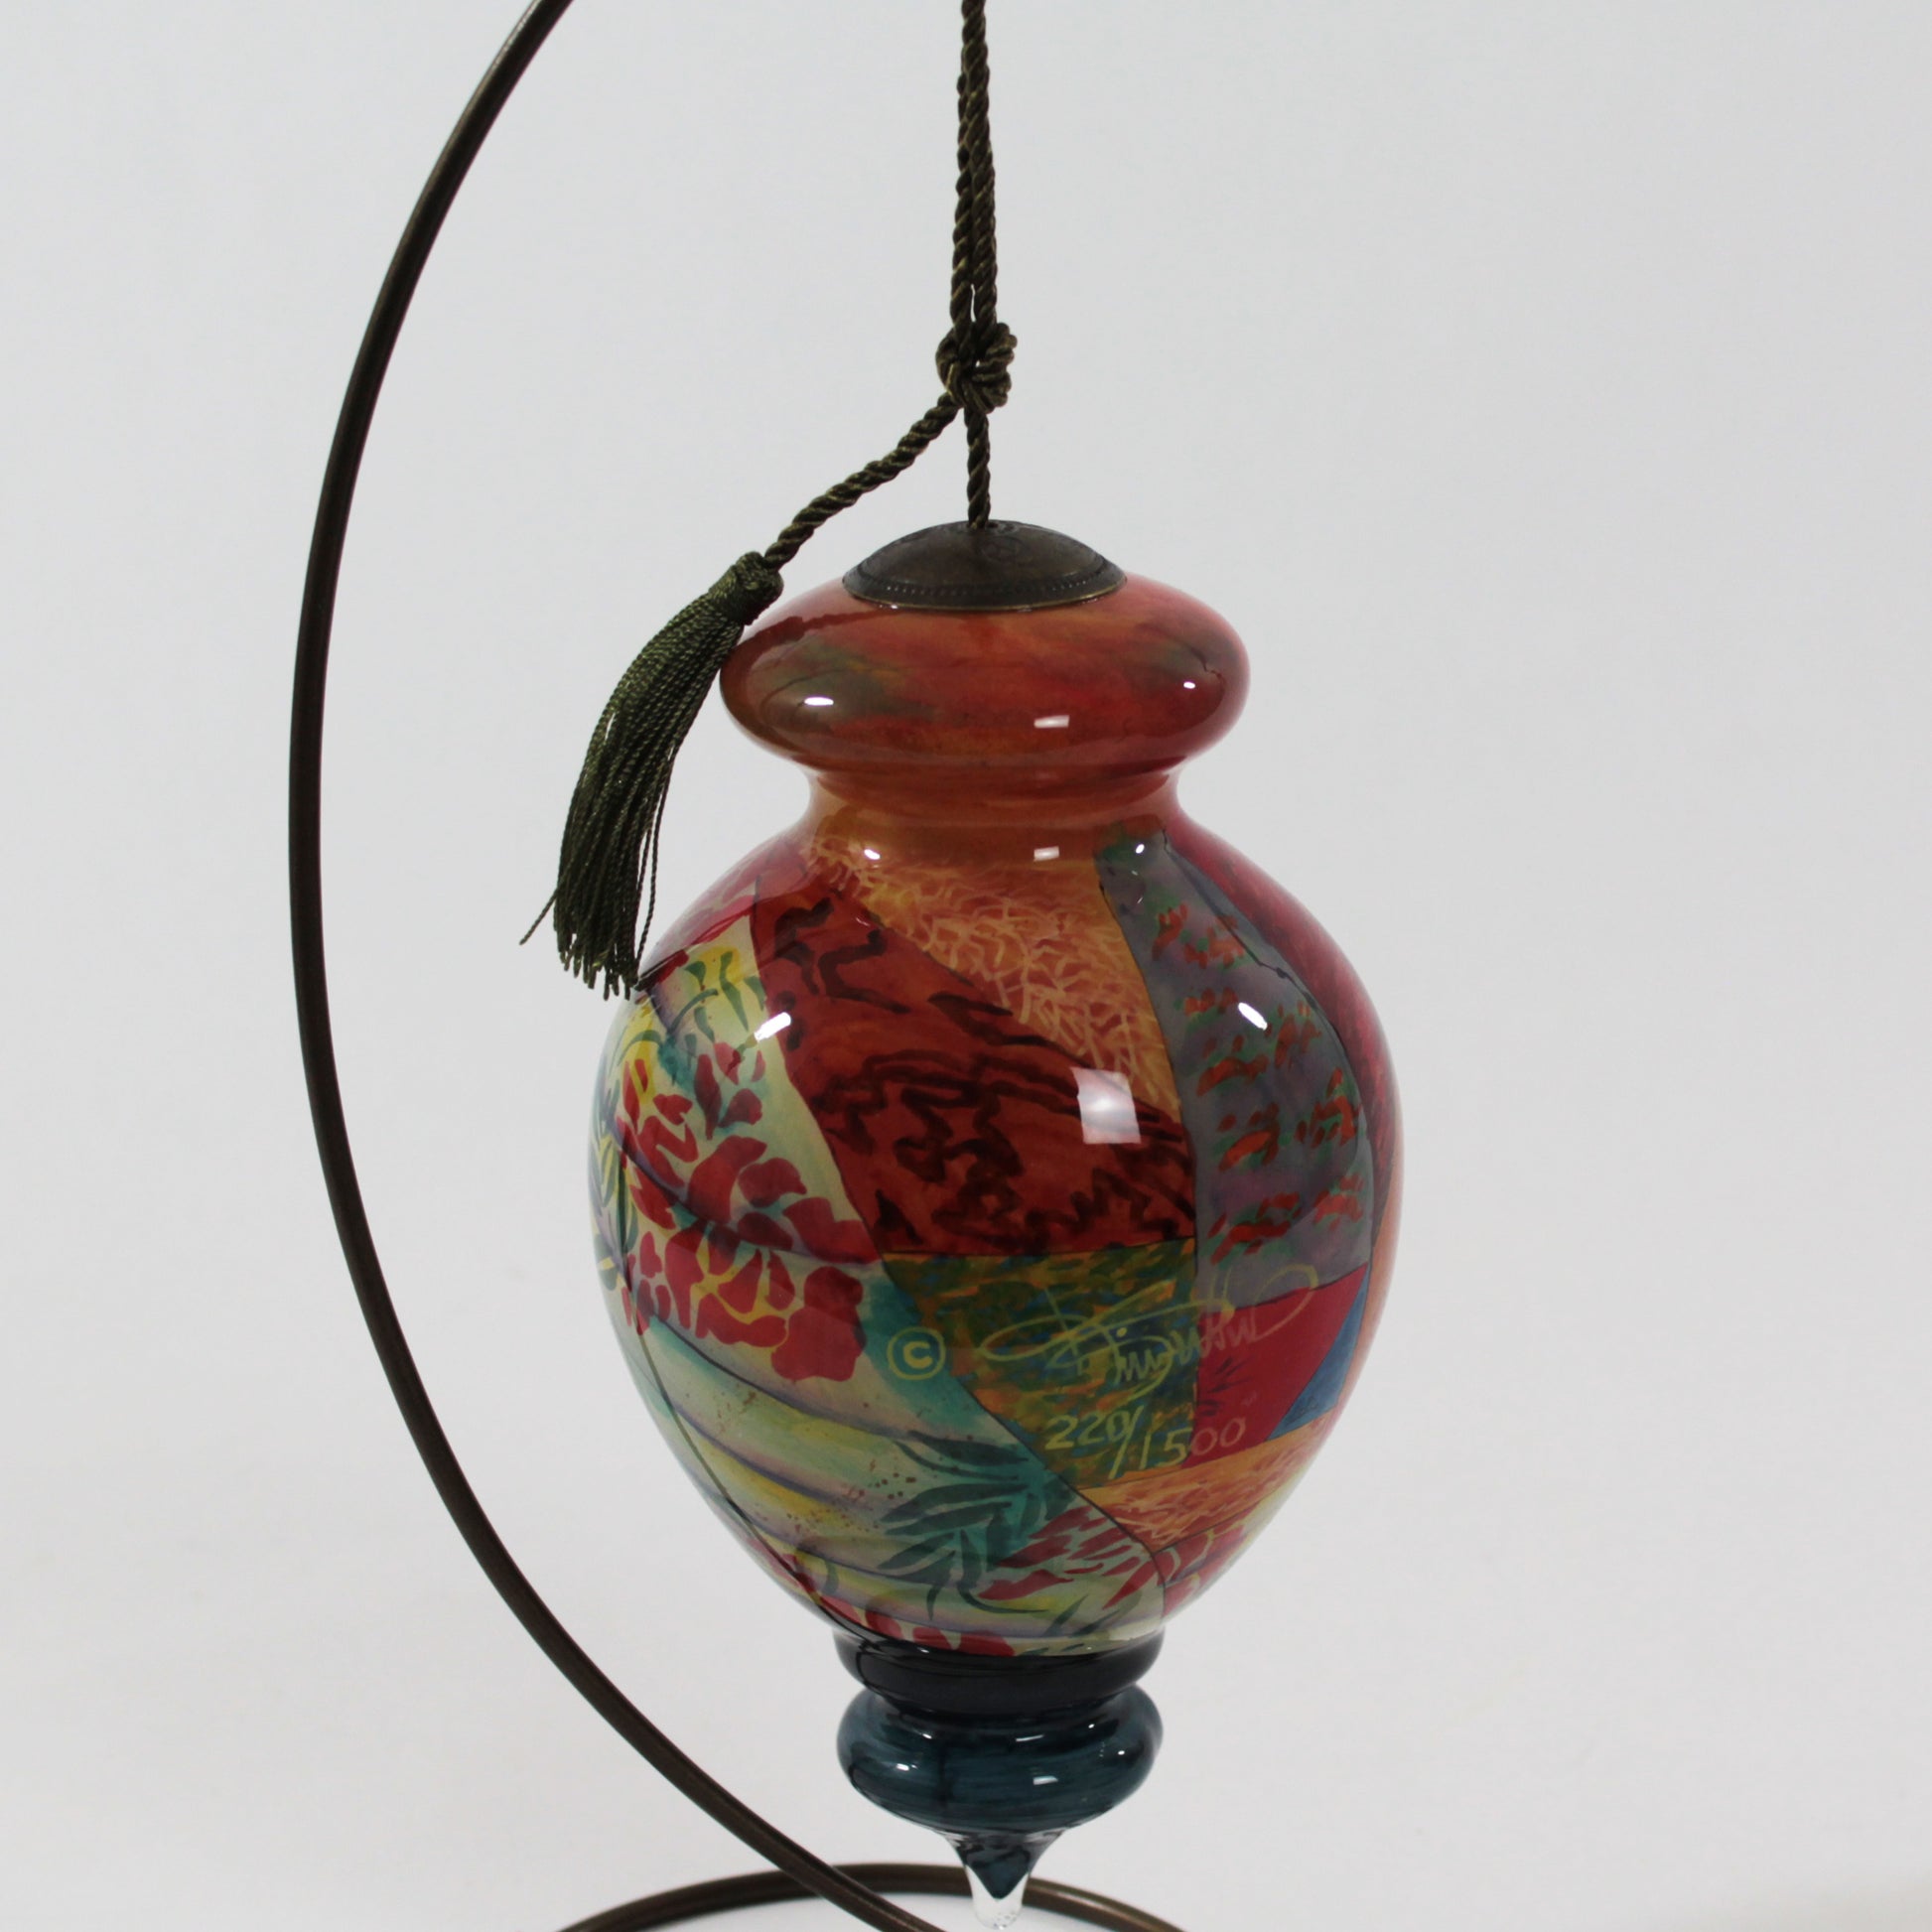 In Mothers Hands NeQwa Art Glass Ornament art by Keith Mallett back